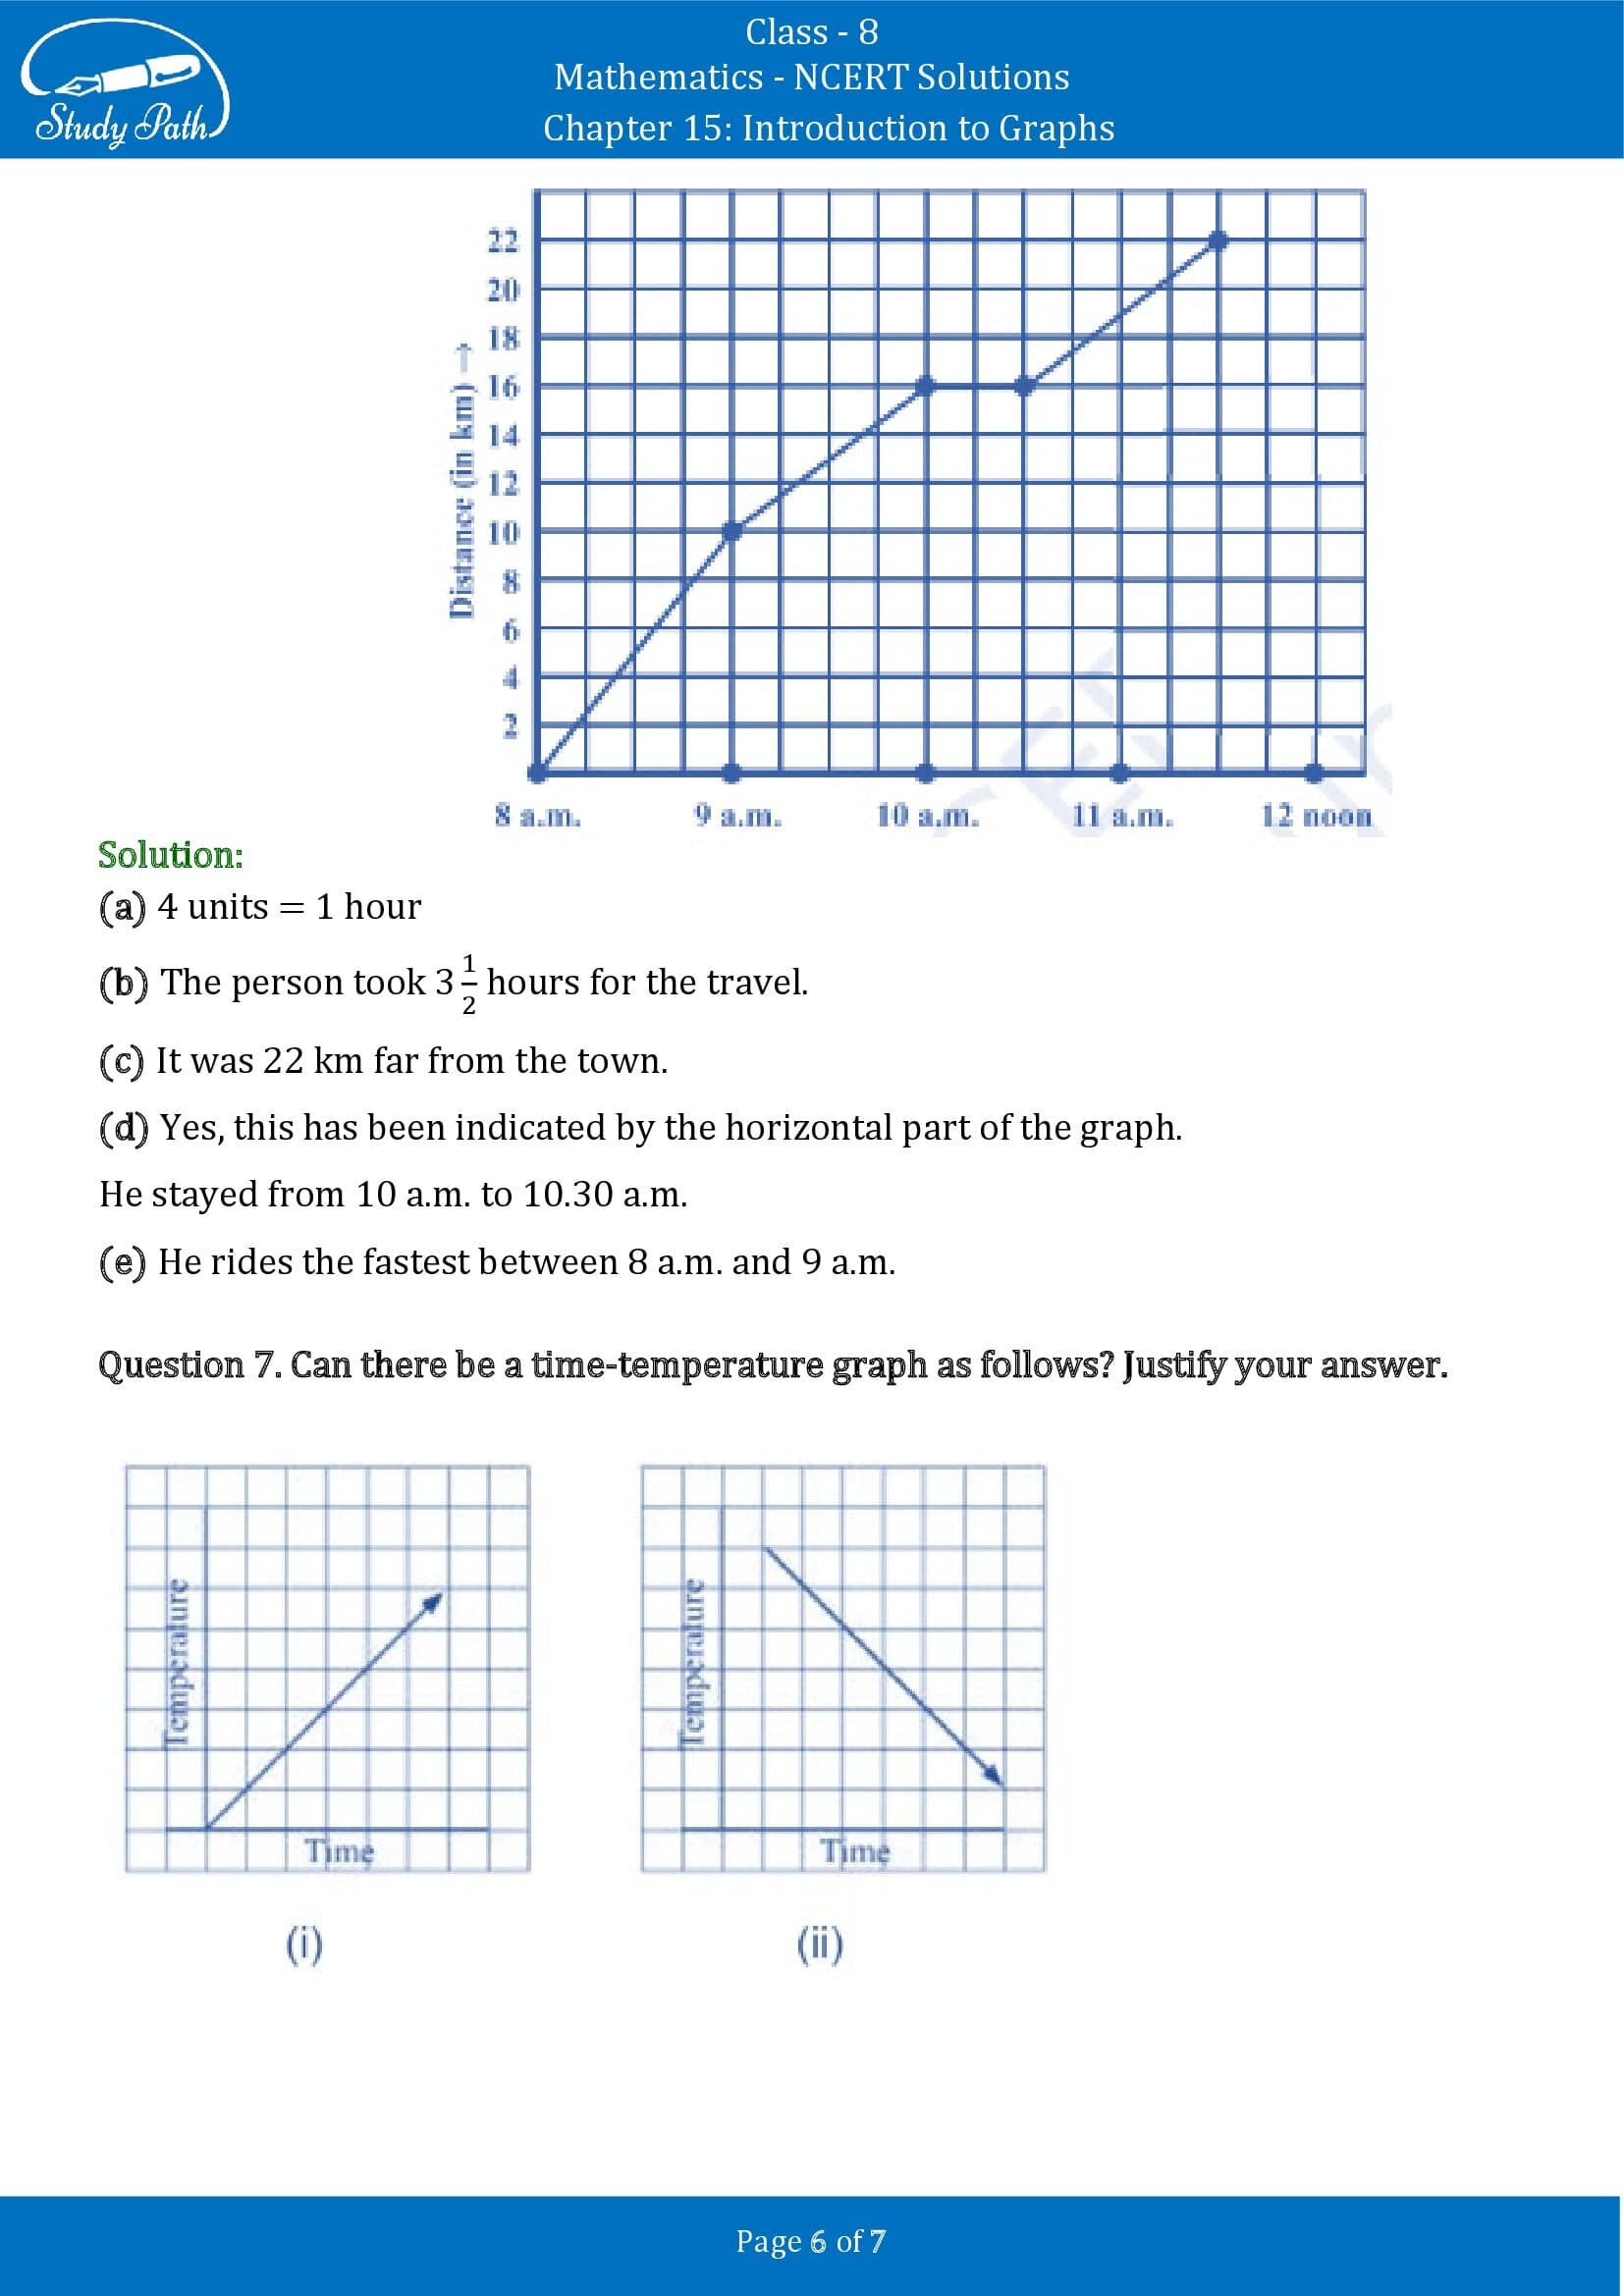 NCERT Solutions for Class 8 Maths Chapter 15 Introduction to Graphs Exercise 15.1 00006